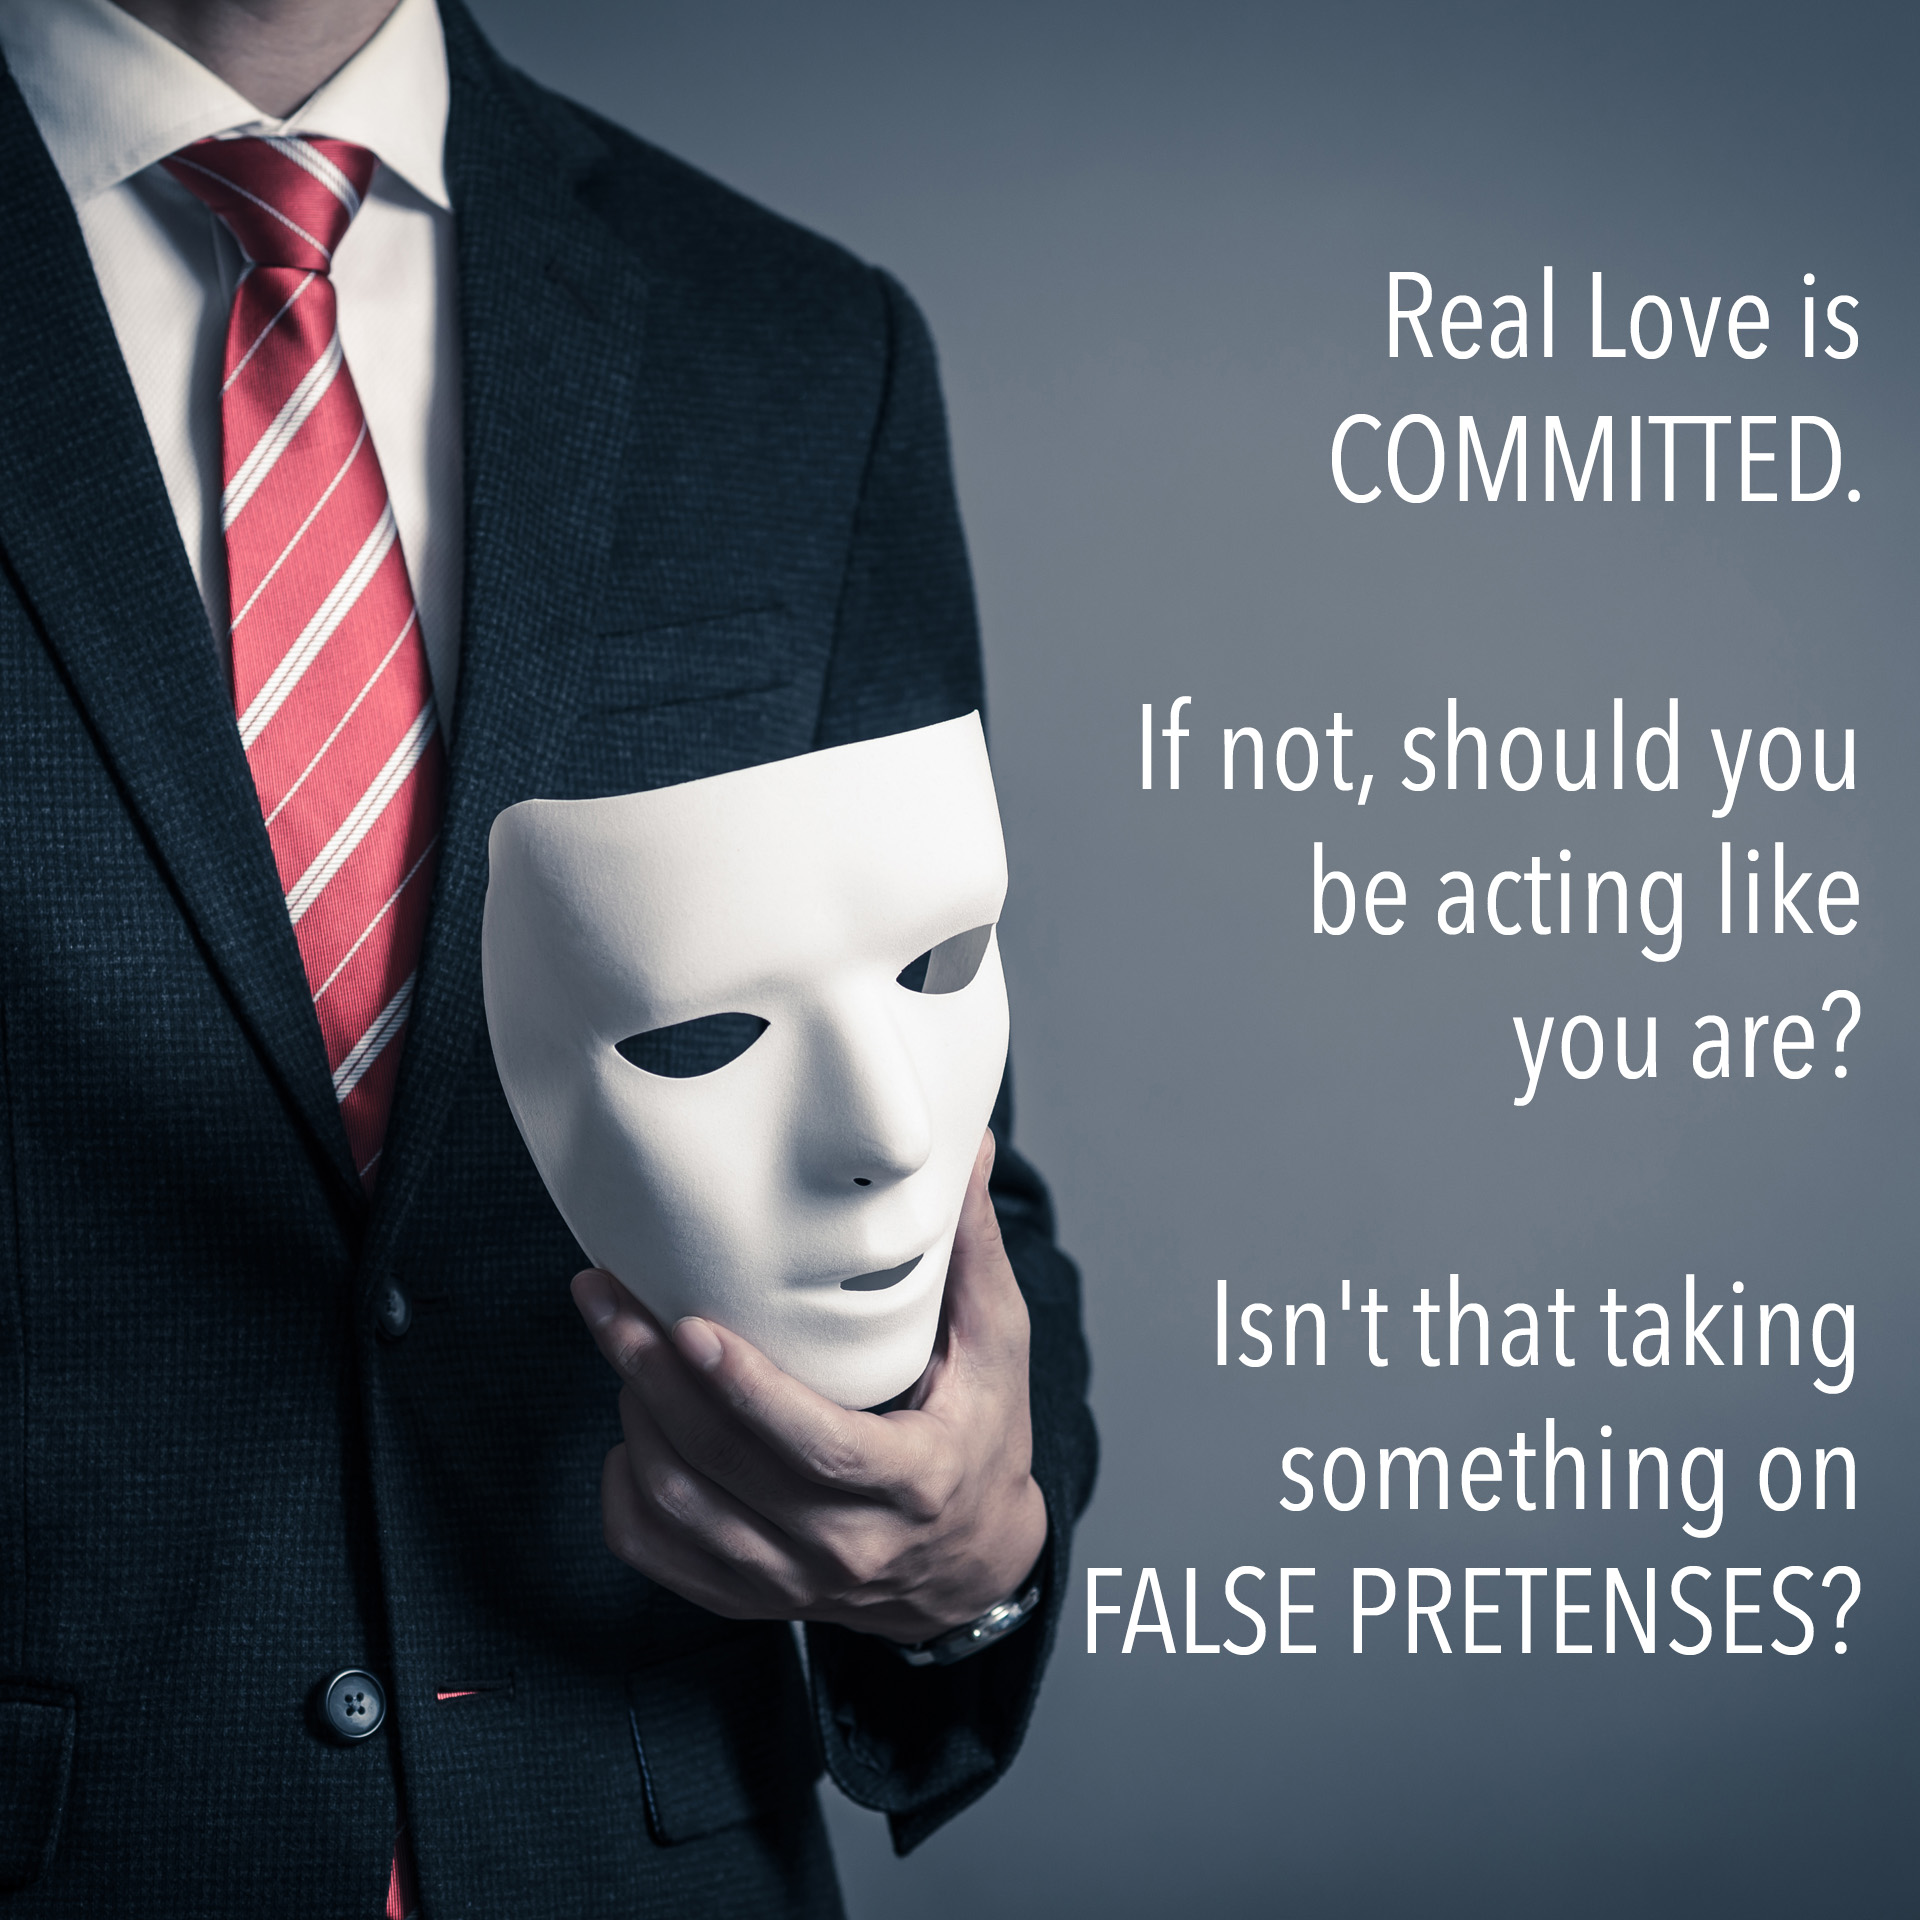 Real Love is COMMITTED. If not, should you be acting like you are? Isn't that taking something on FALSE PRETENSES?